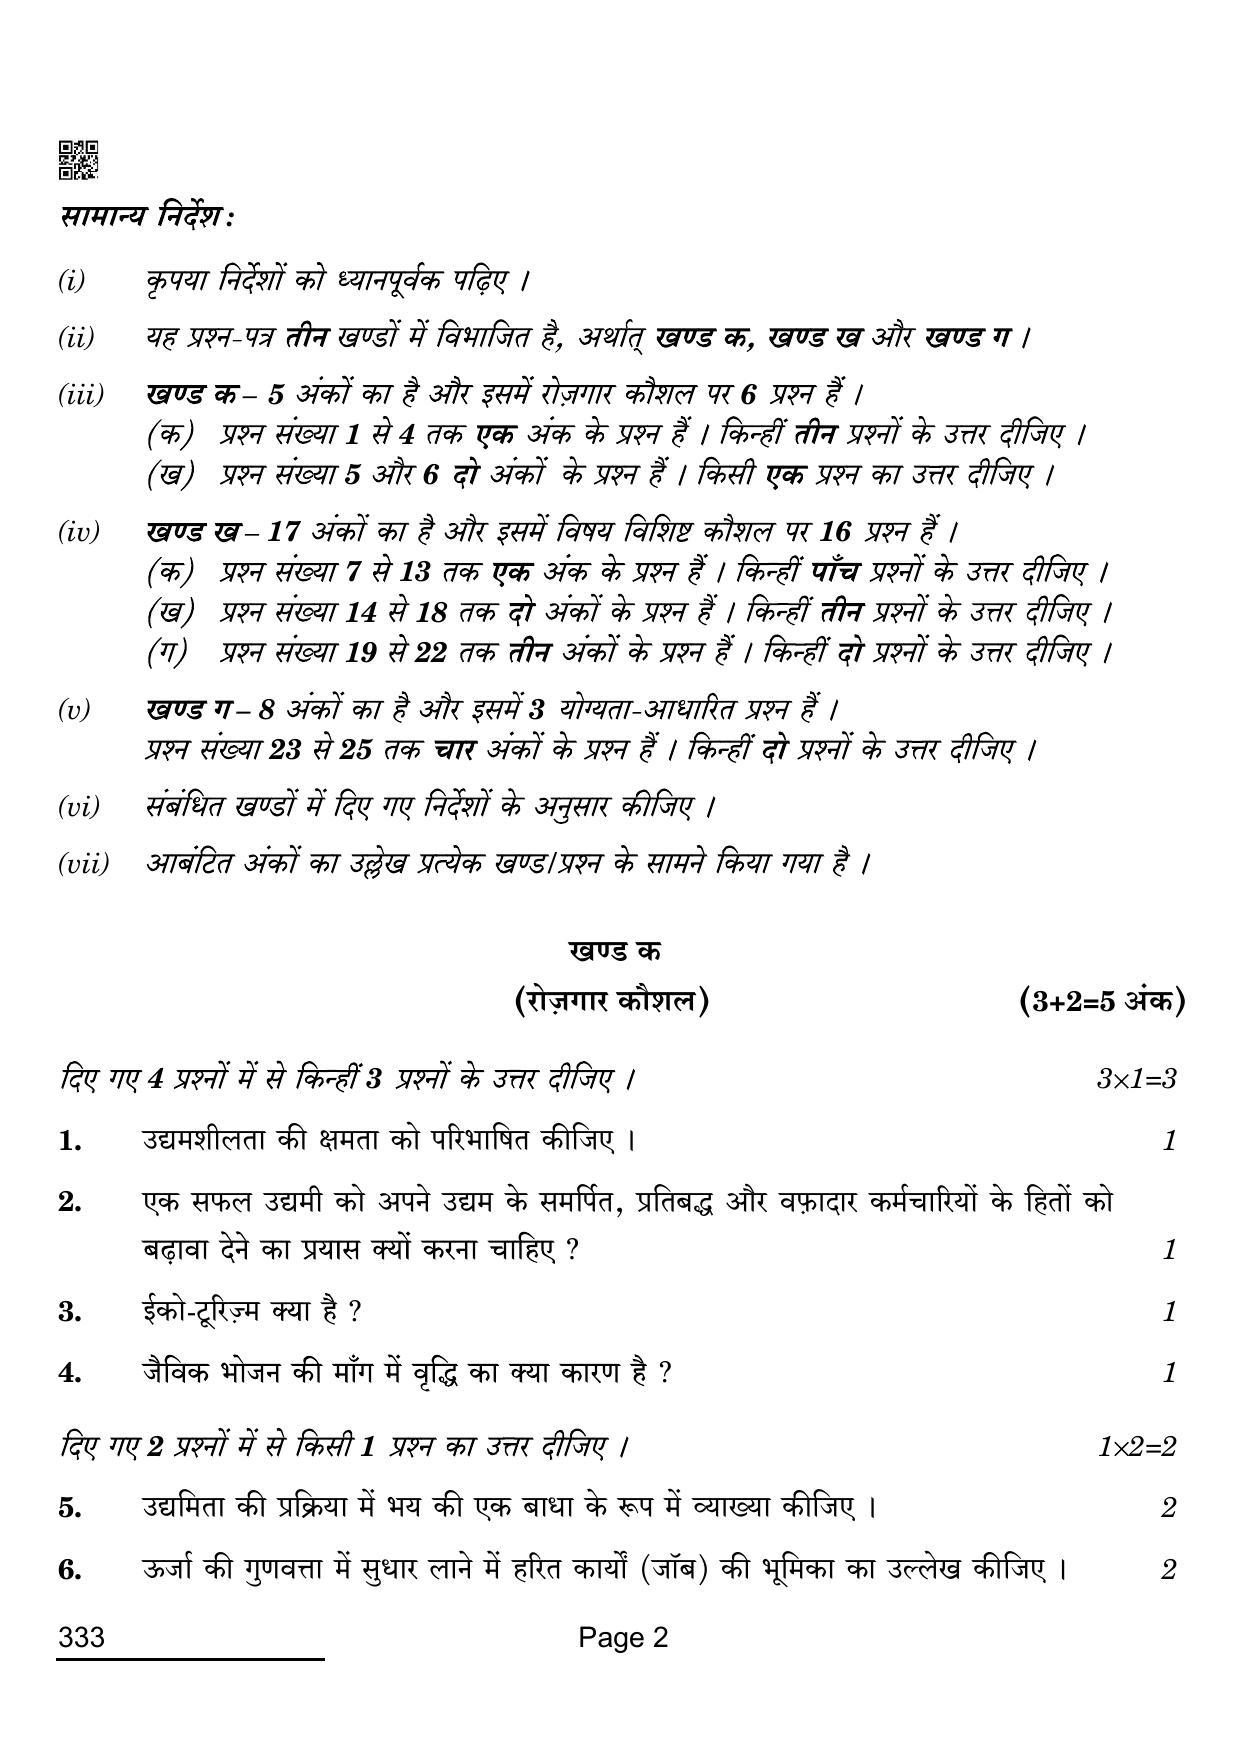 CBSE Class 12 333_food Production 2022 Question Paper - Page 2